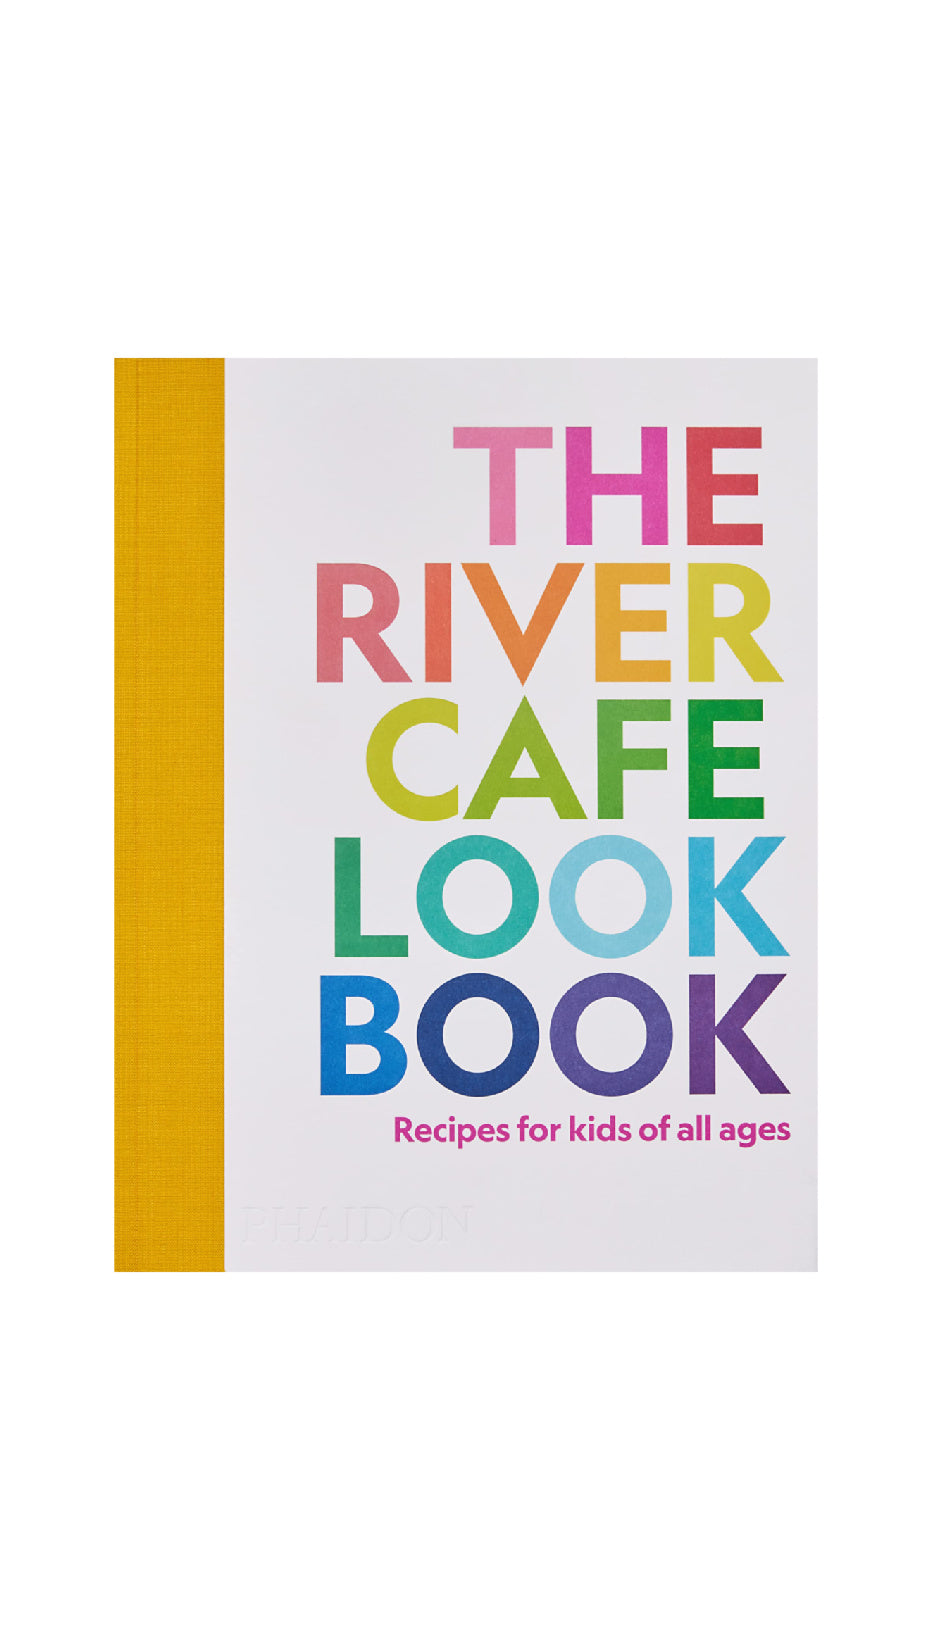 The River Cafe Look Book, Recipes for Kids of all Ages / RUTH ROGERS